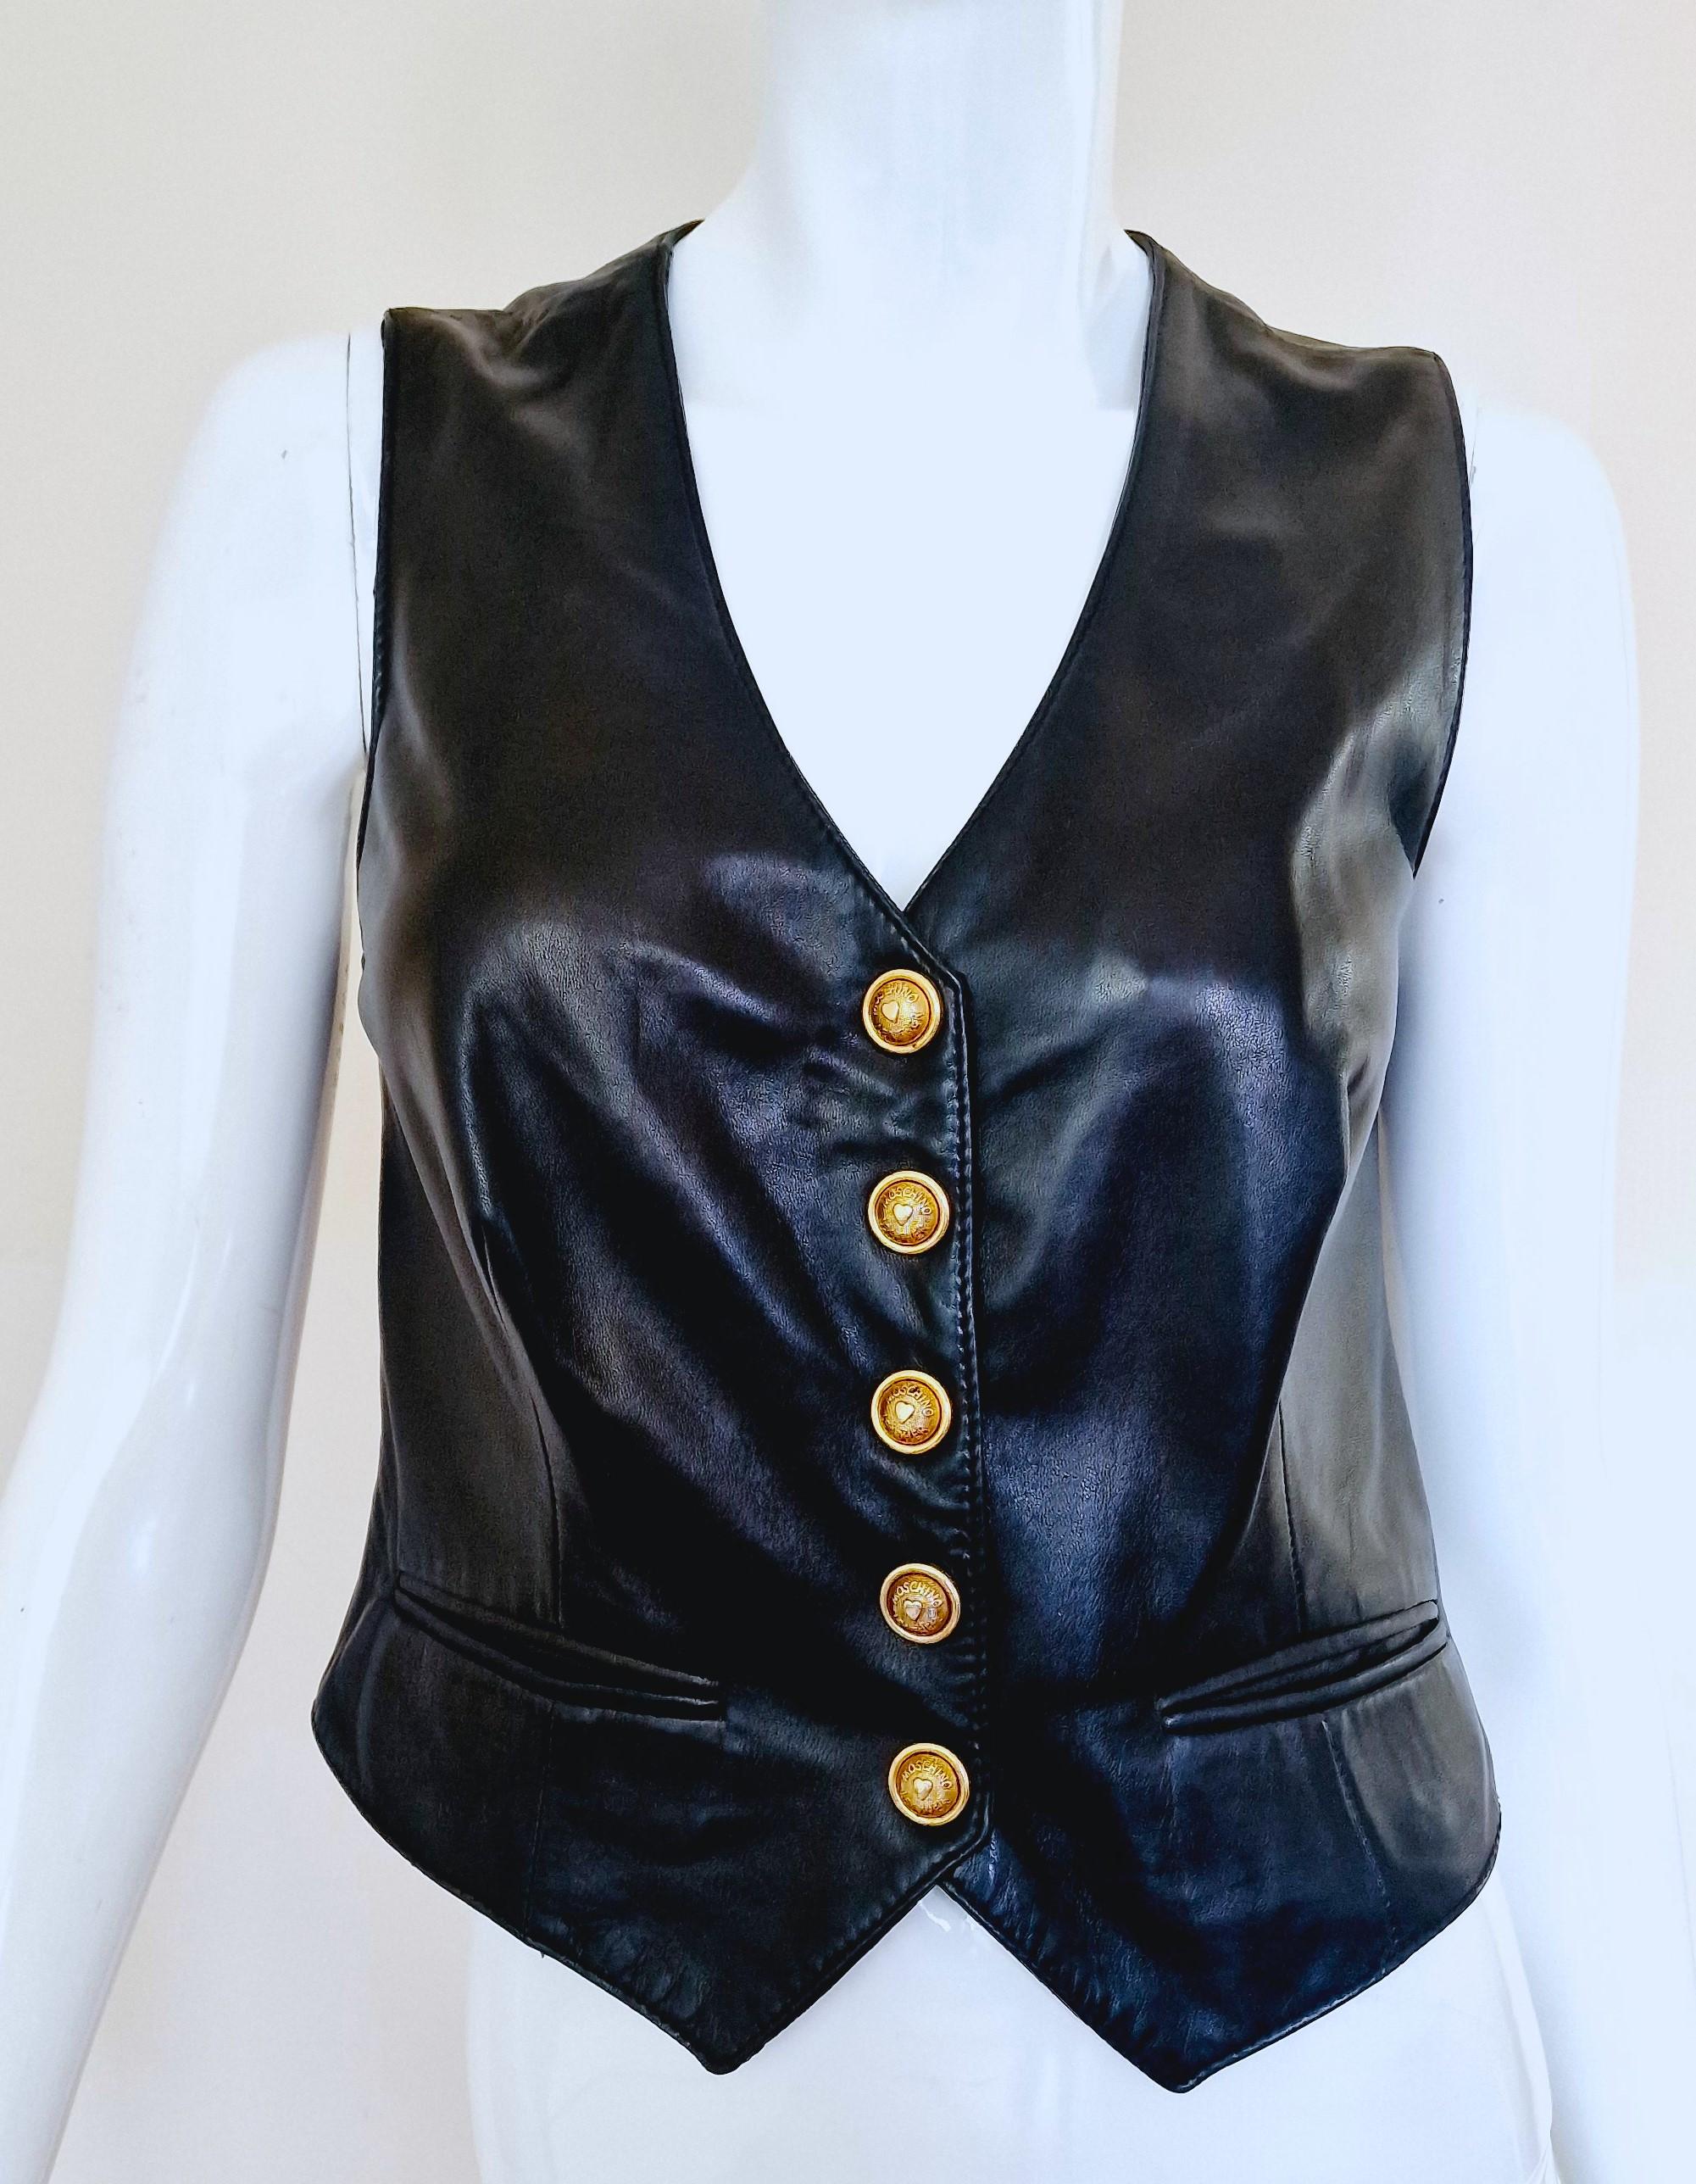 Heart cut-out leather vest by Moschino! 
Moschino Leather golden buttons.
2 front pockets.
Bella Hadid worn the same piece and shared the photos on her Instagram in 2020. 

EXCELLENT condition! The only sig of wear is on the back, please see the